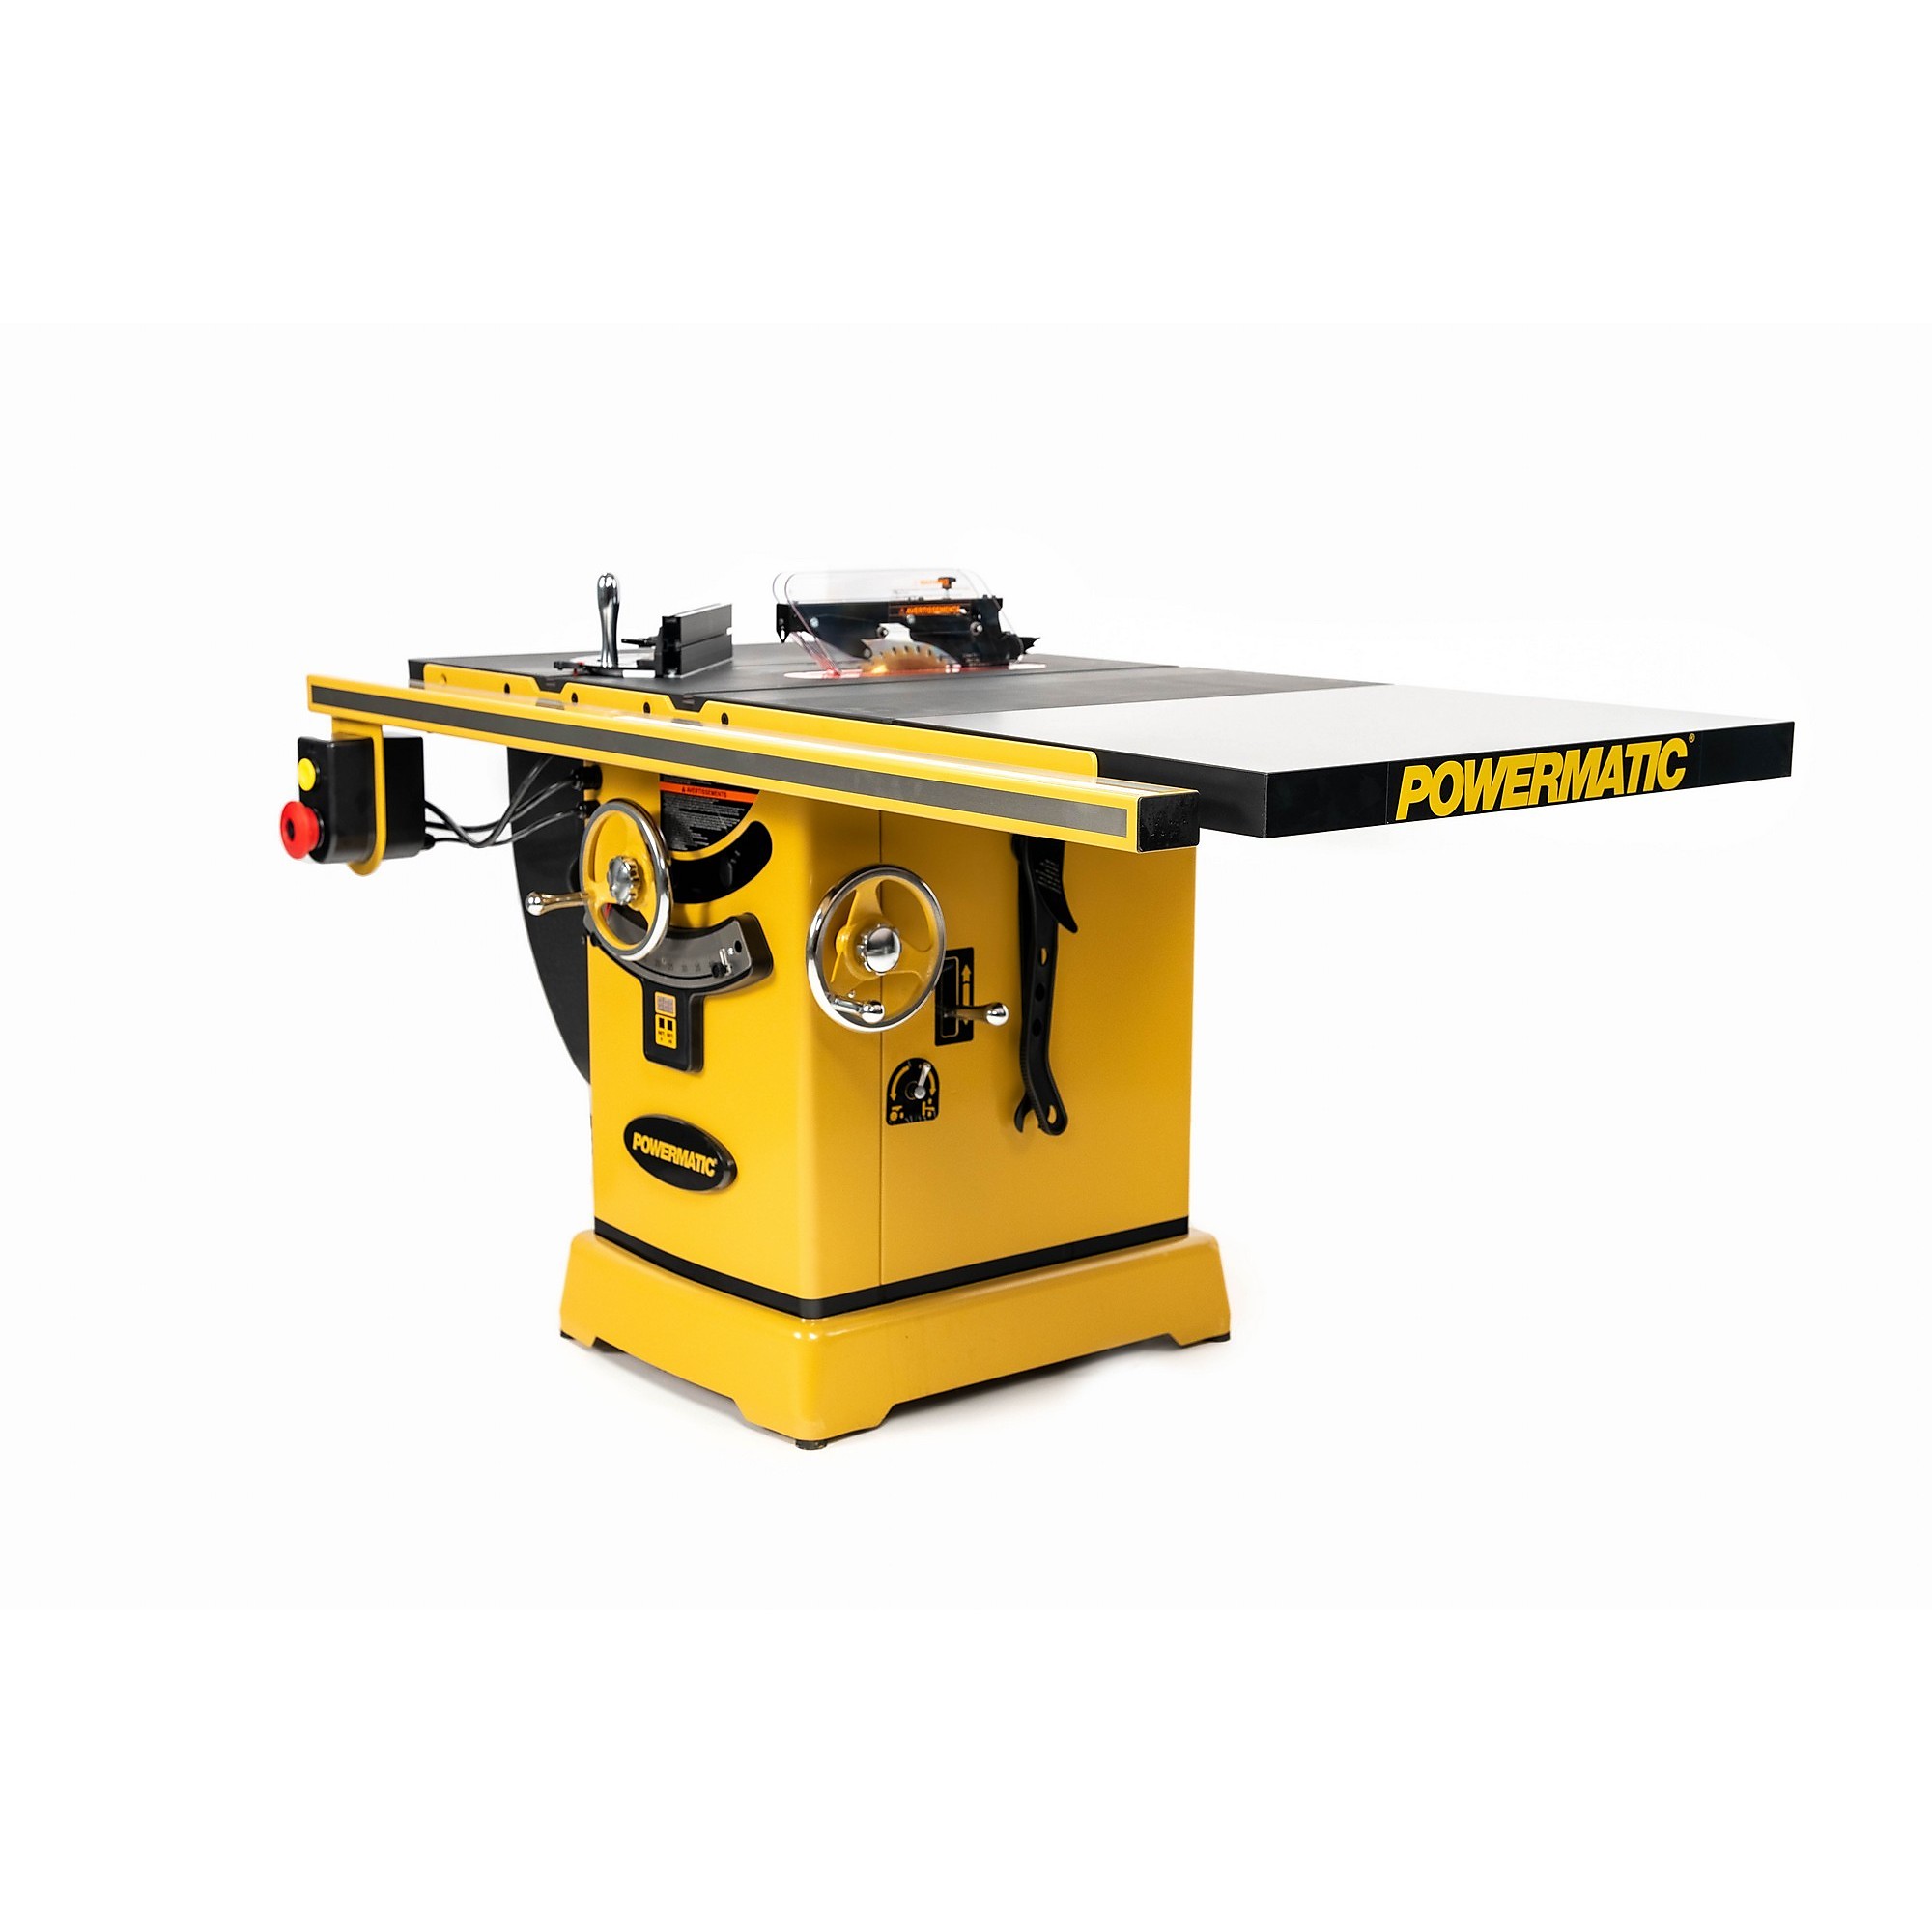 Powermatic, ArmorGlide Table Saw, Blade Diameter 10 Horsepower 5 HP, Volts 230 Model PM2000T -  PM25150RKT